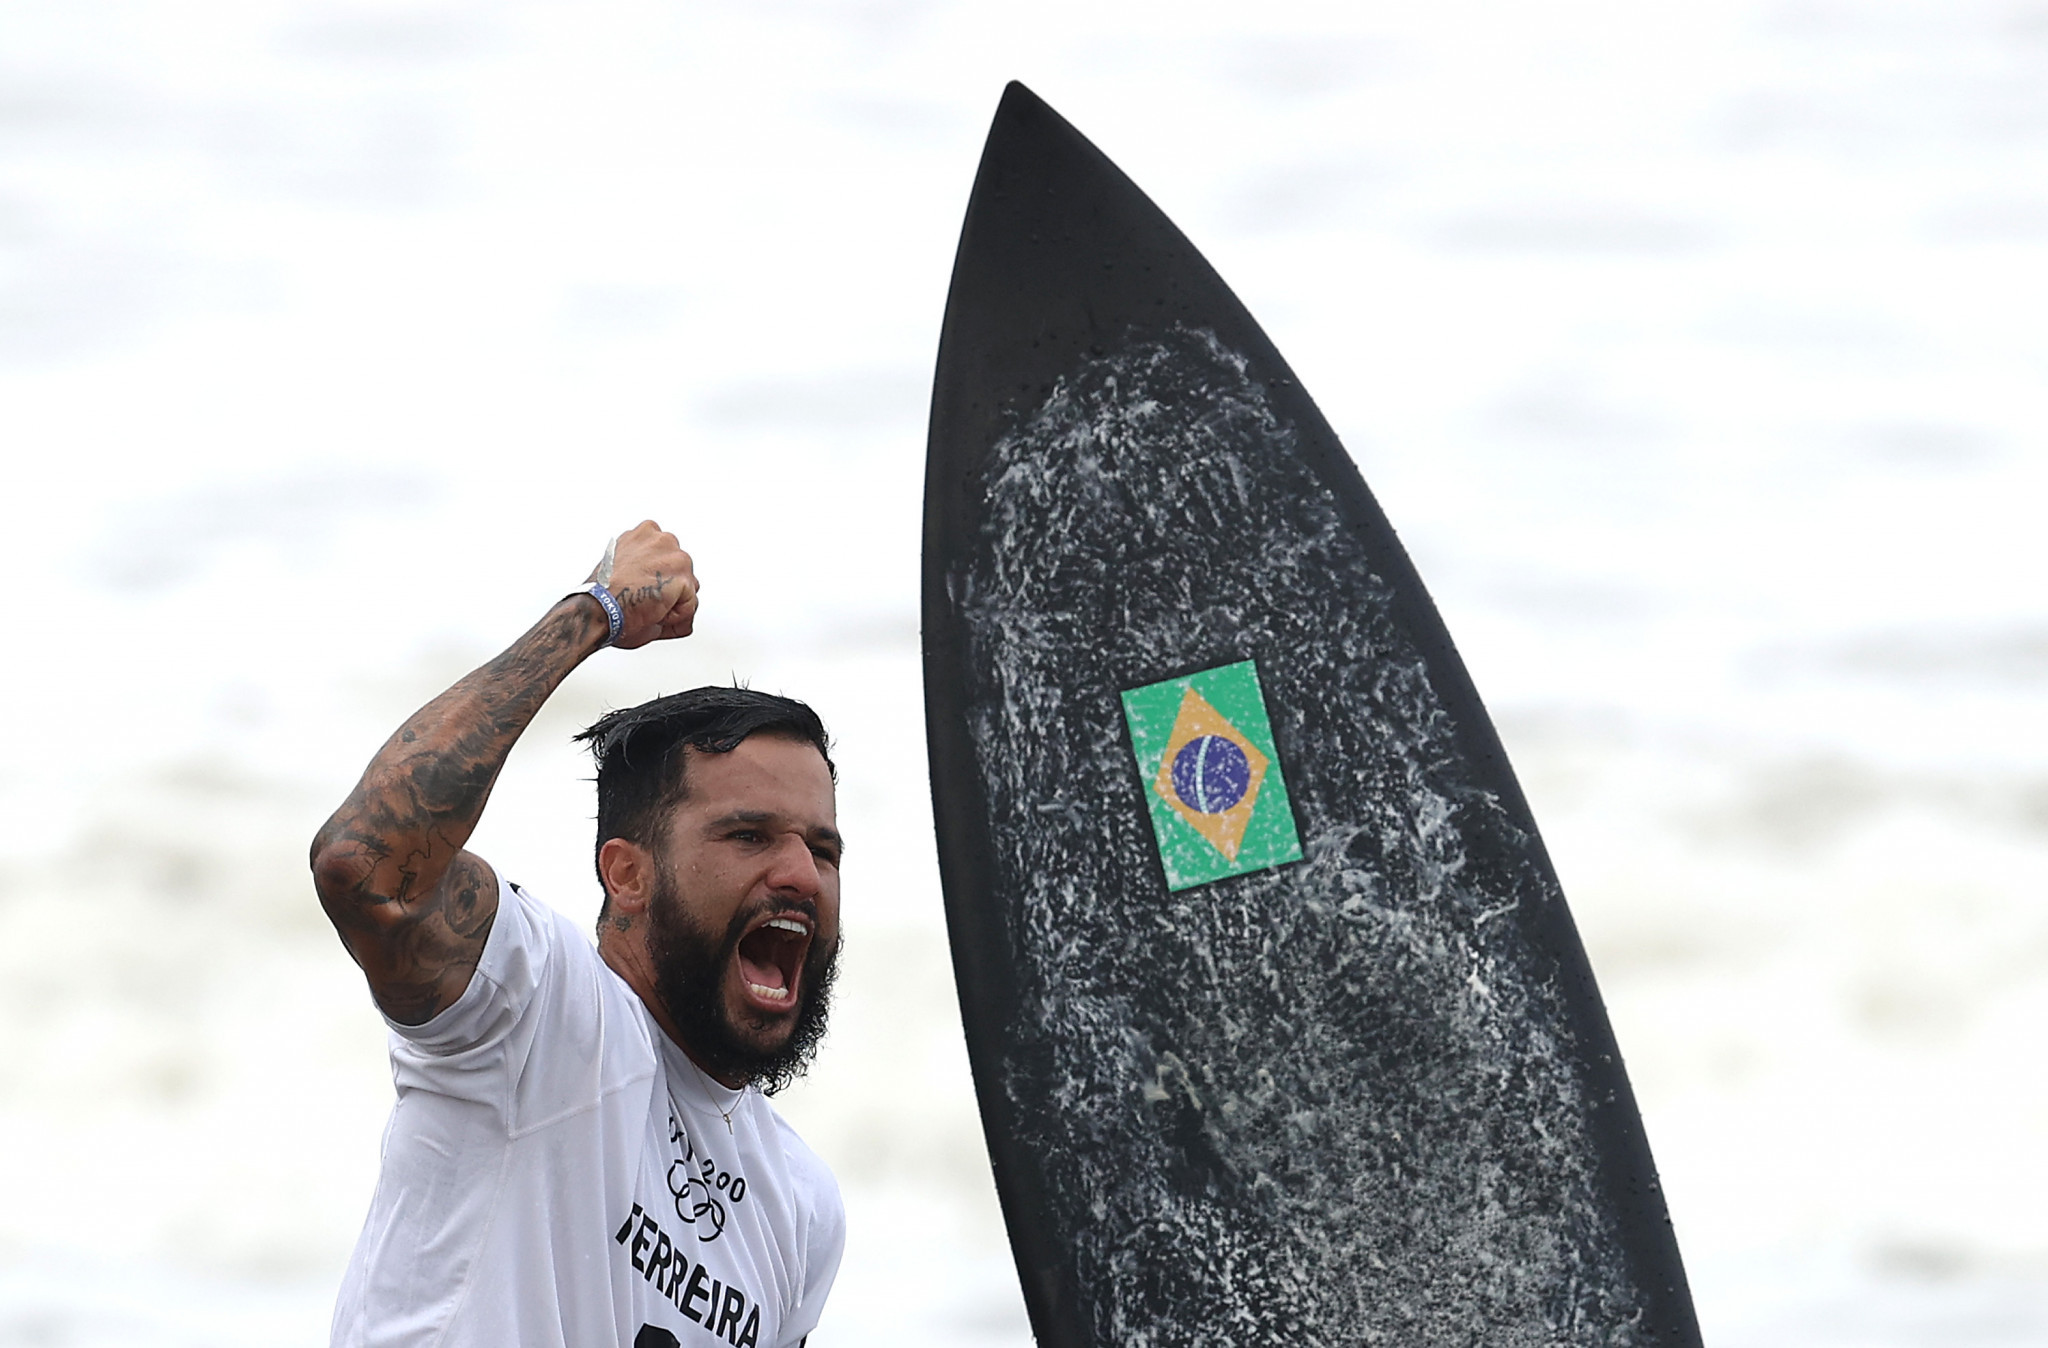 Ferreira and Moore make history by winning first Olympic golds in surfing